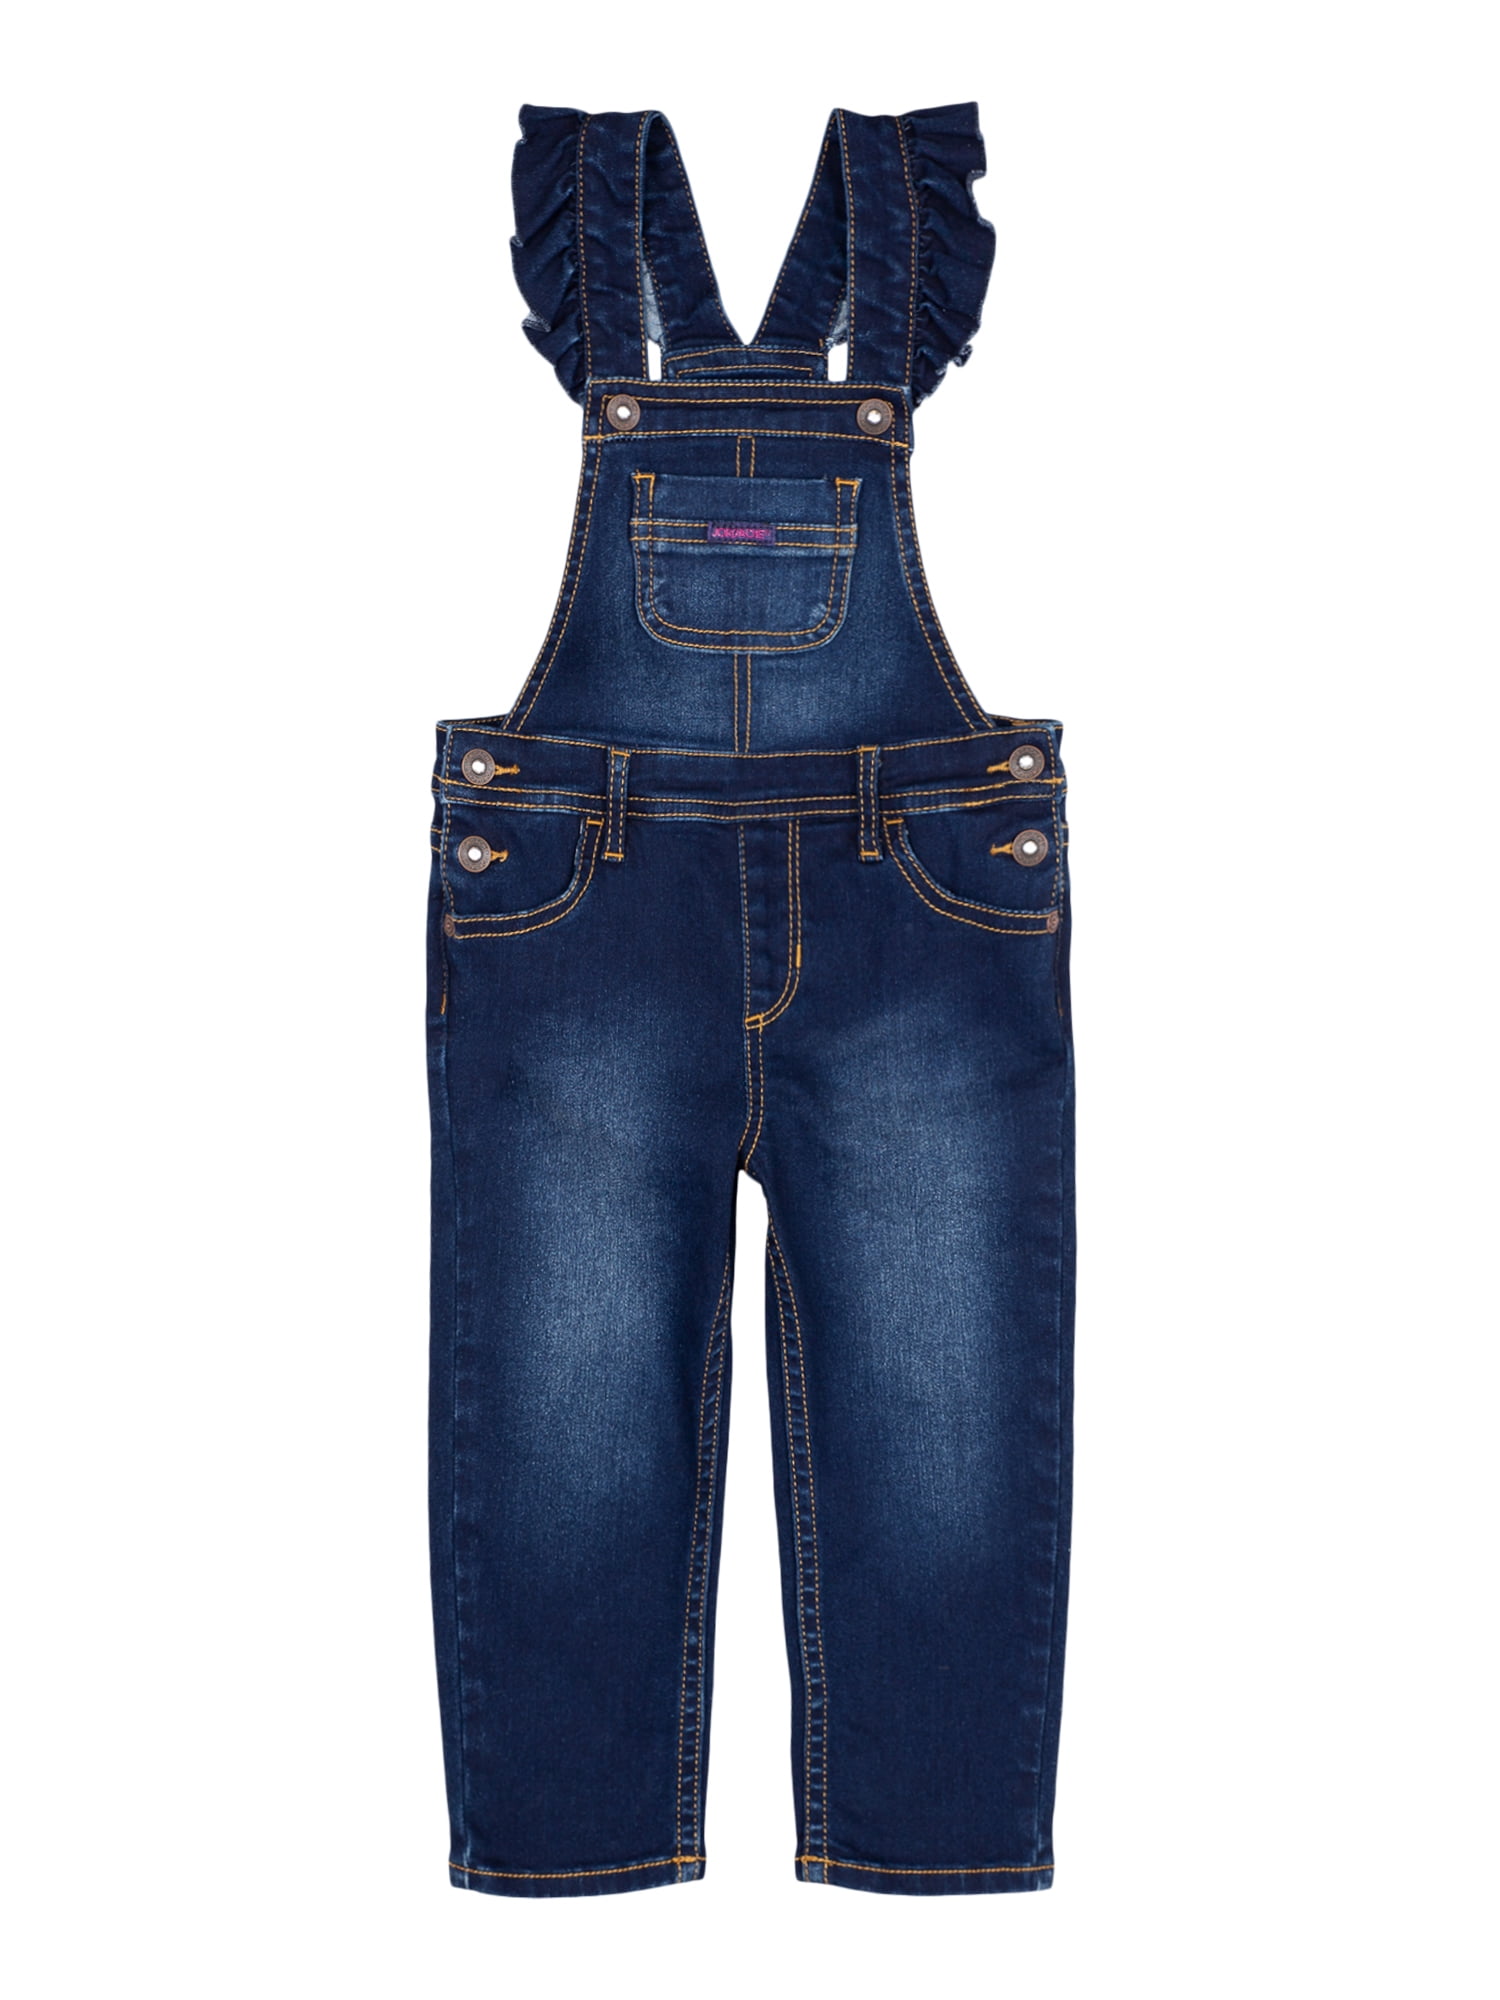 blue jean overalls for toddlers